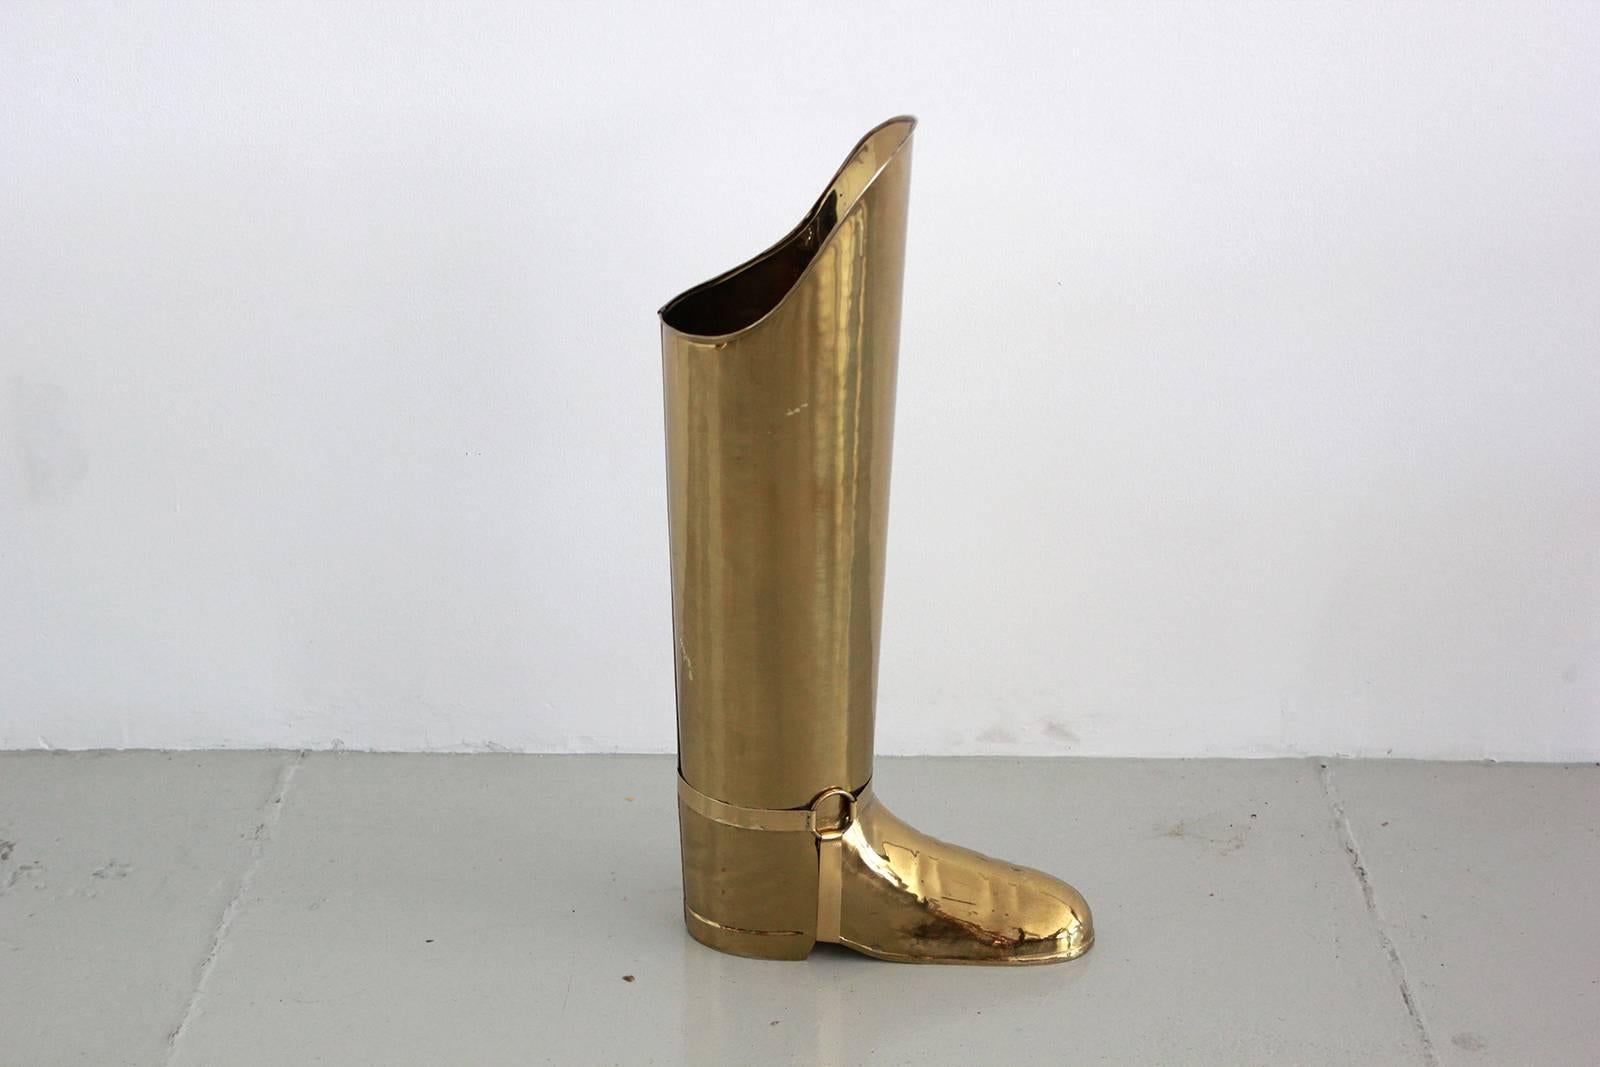 Vintage brass boot in the shape of a wellington boot that holds umbrellas!
Solid brass and stamped made in Belgium.
circa 1950s.